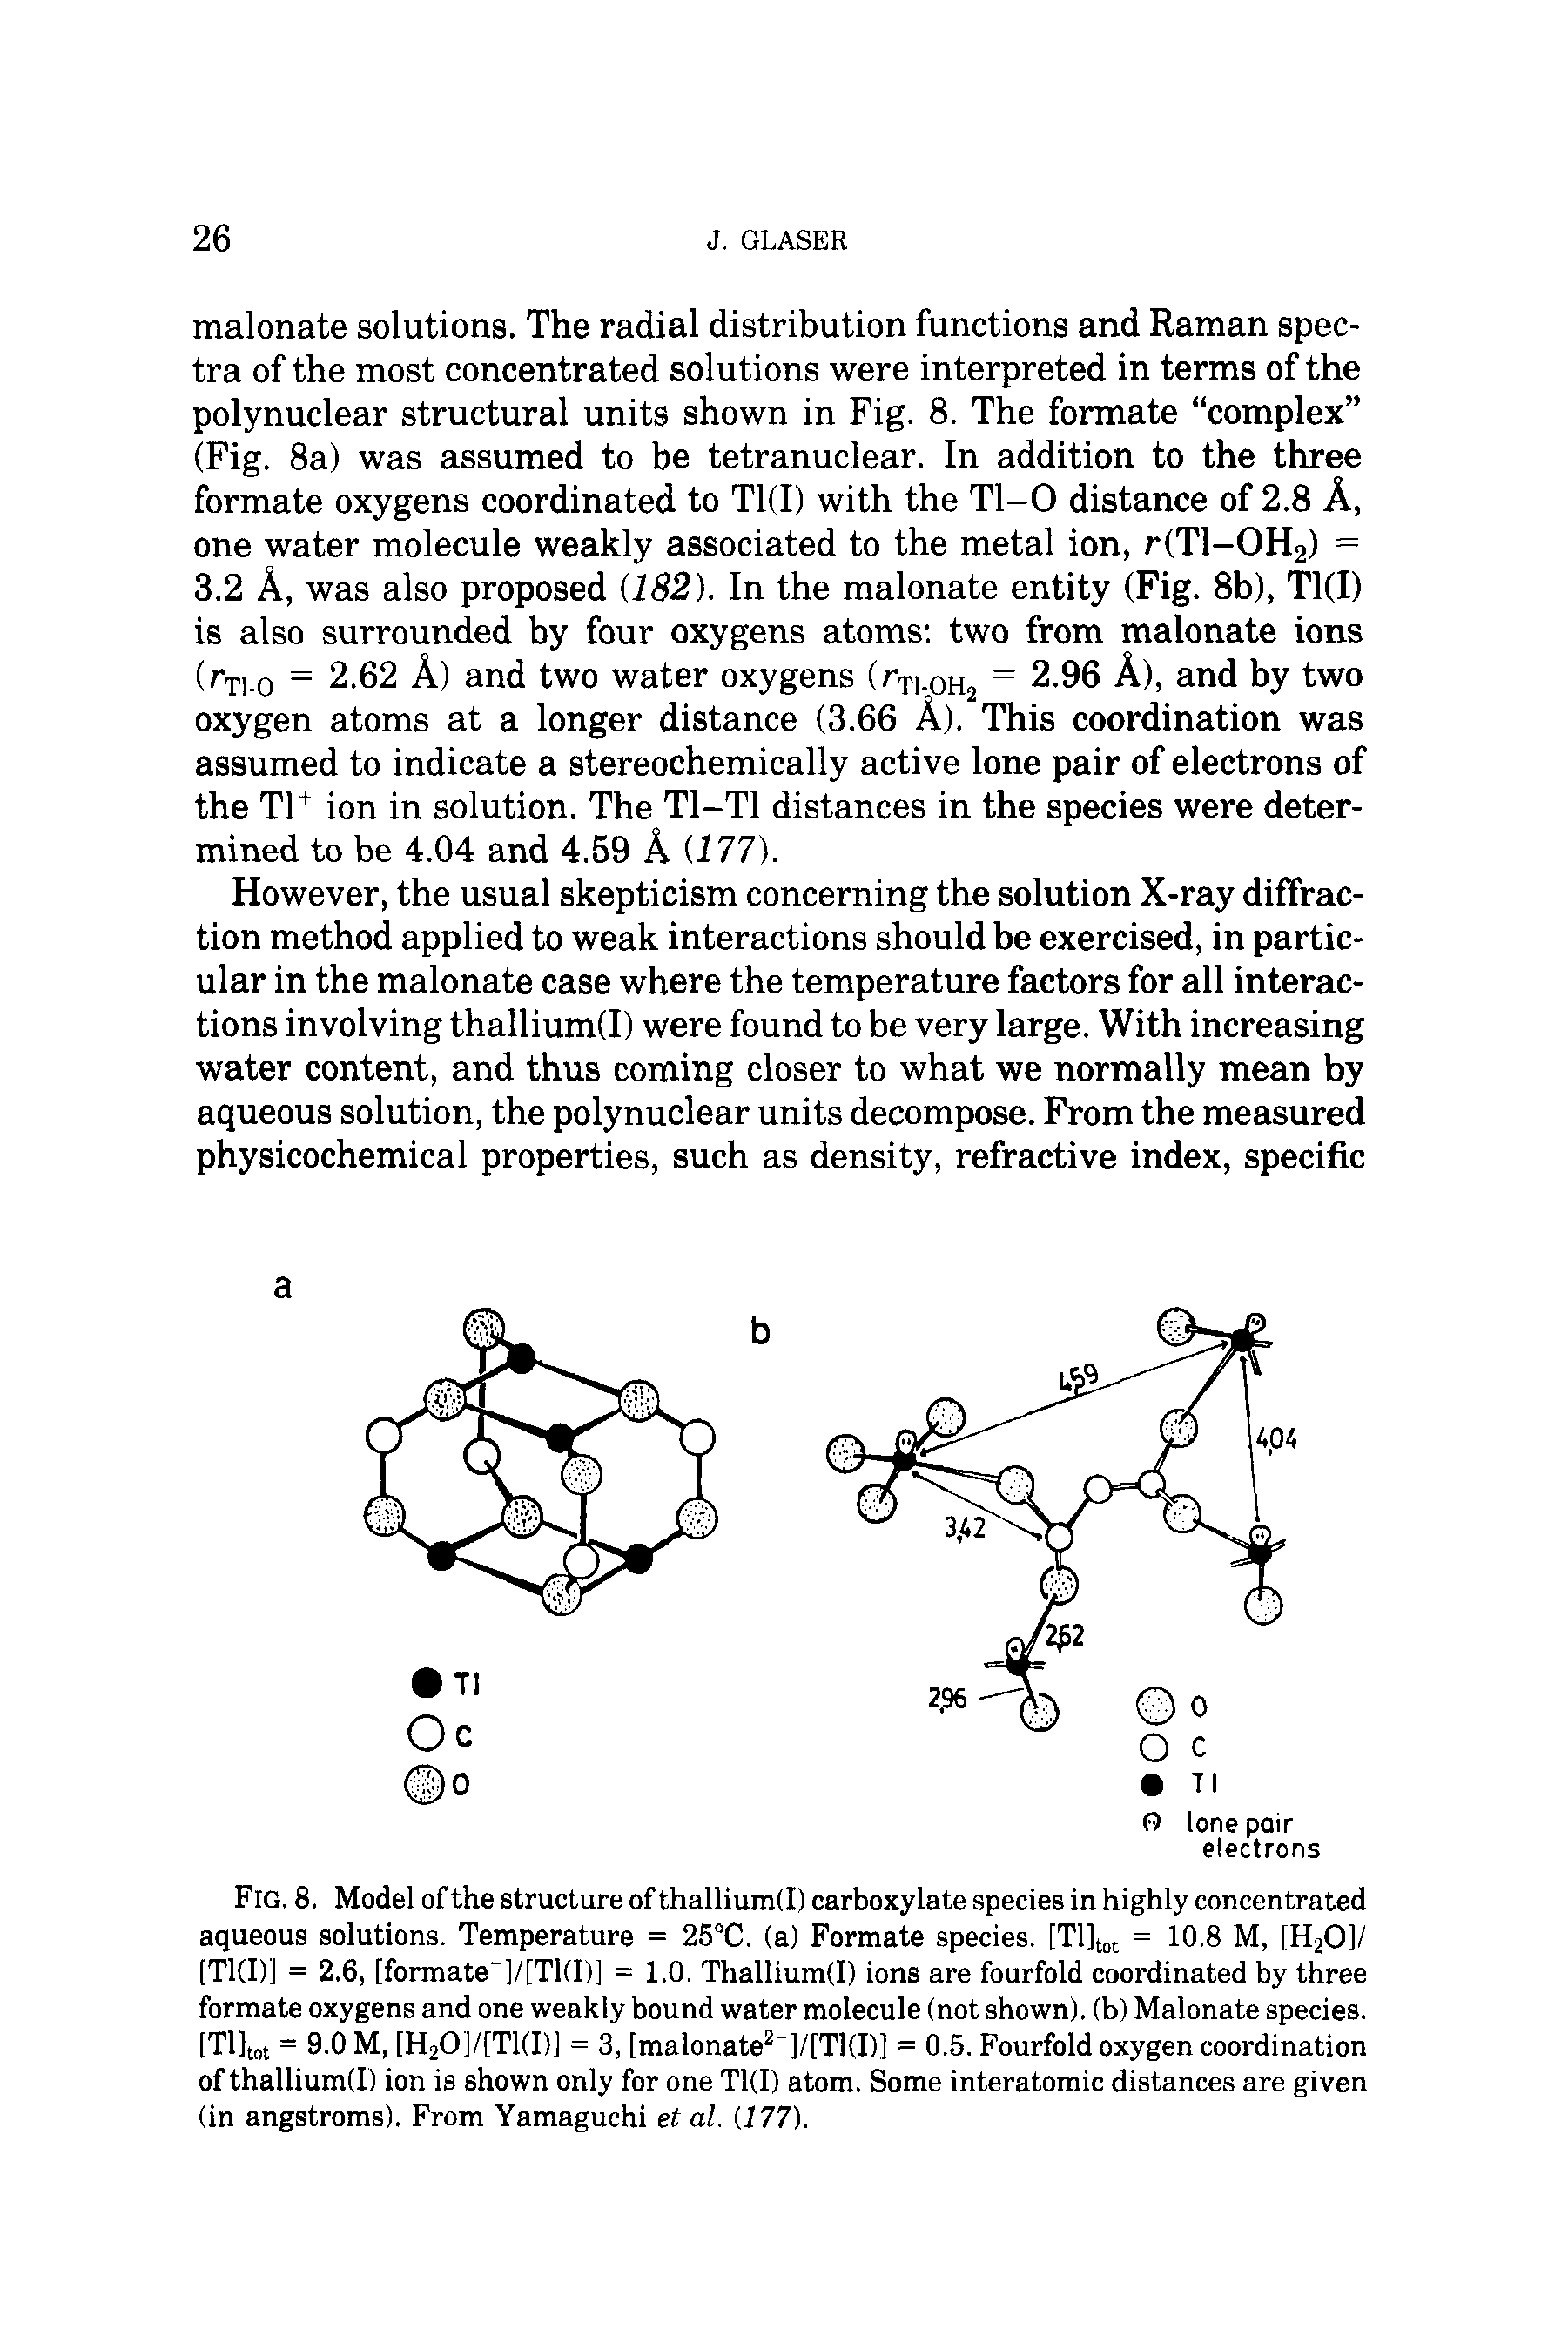 Fig. 8. Model of the structure of thallium(I) carboxylate species in highly concentrated aqueous solutions. Temperature = 25°C. (a) Formate species. [Tl]t t = 10.8 M, [H2O]/ [TKD] = 2.6, [formate ]/[Tl(I)] = 1.0. Thalliumd) ions are fourfold coordinated by three formate oxygens and one weakly bound water molecule (not shown), (b) Malonate species. [TlJtot = 9-0 M, [H20]/[T1(D] = 3, [malonate "]/[Tl D] = 0.5. Fourfold oxygen coordination of thalliumd) ion is shown only for one T1(I) atom. Some interatomic distances are given (in angstroms). From Yamaguchi et al. 177).